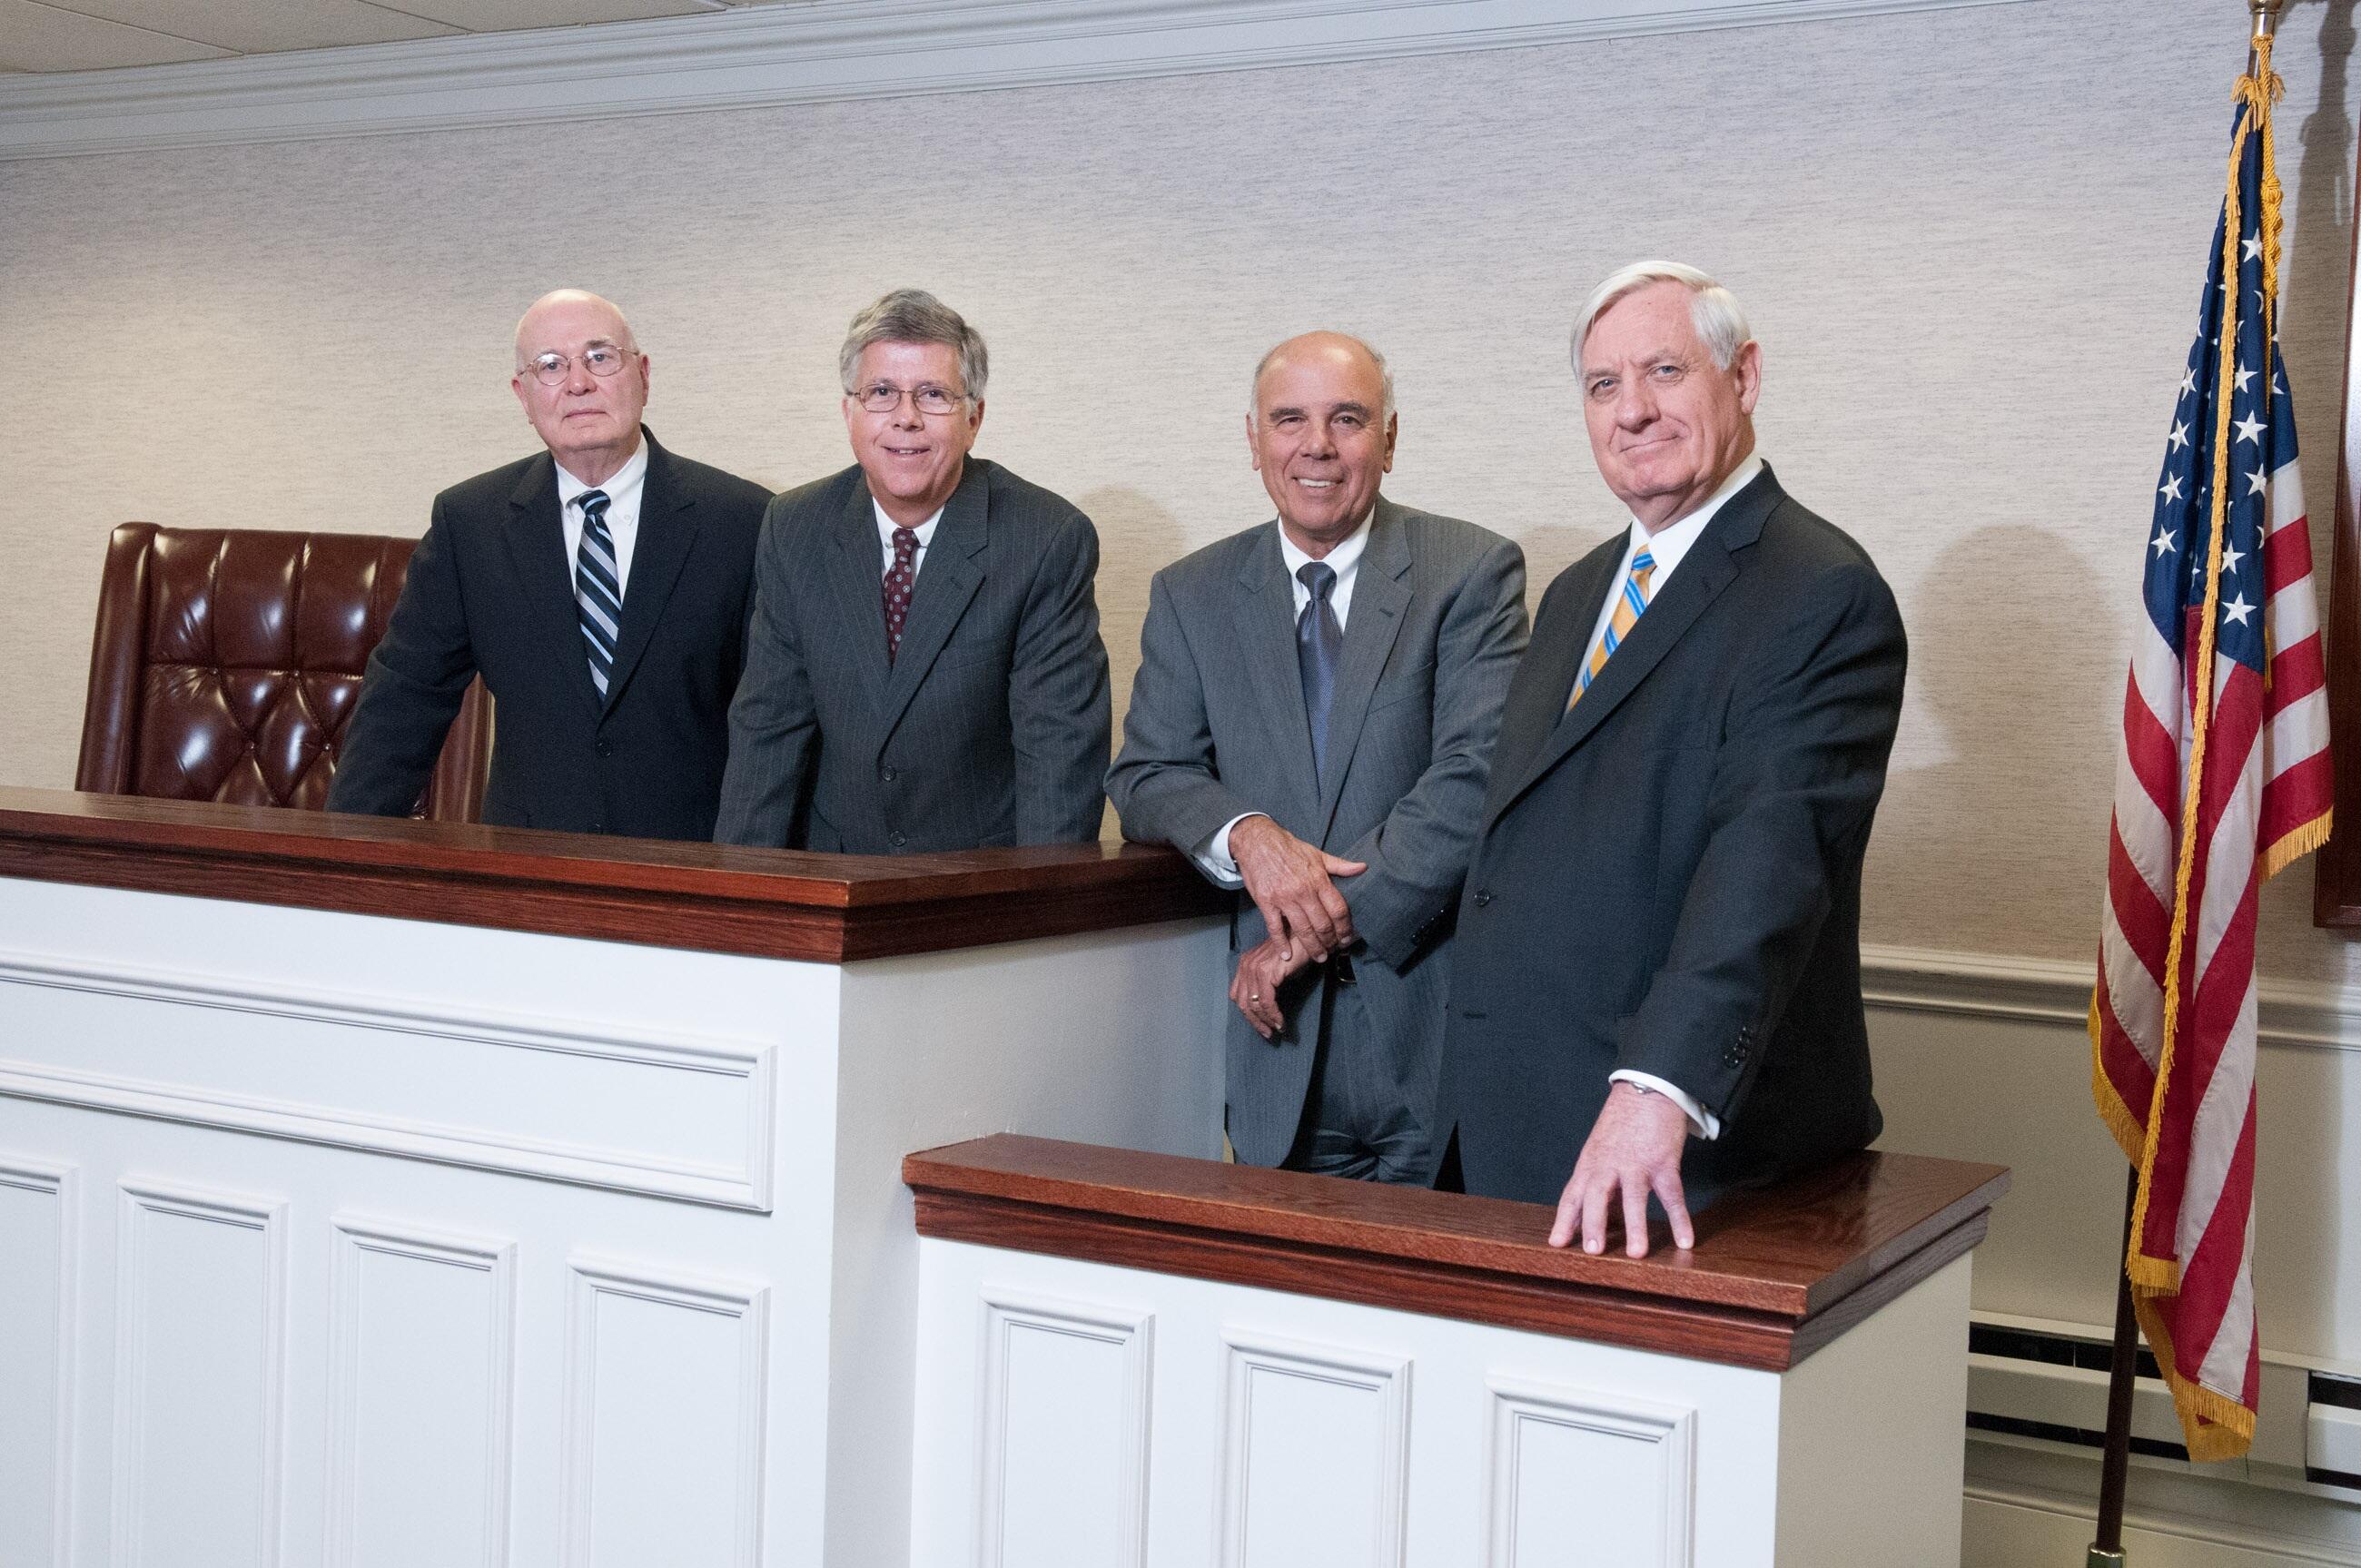 Left to Right: Former Connecticut Supreme Court Judge, C. Ian McLachlan; former New Jersey Superior Court Judge, Thomas W. Cavanagh, Jr.; former Dean of Seton Hall University School of Law, Ronald J. Riccio; and former United States District Court Judge, Dennis M. Cavanaugh.